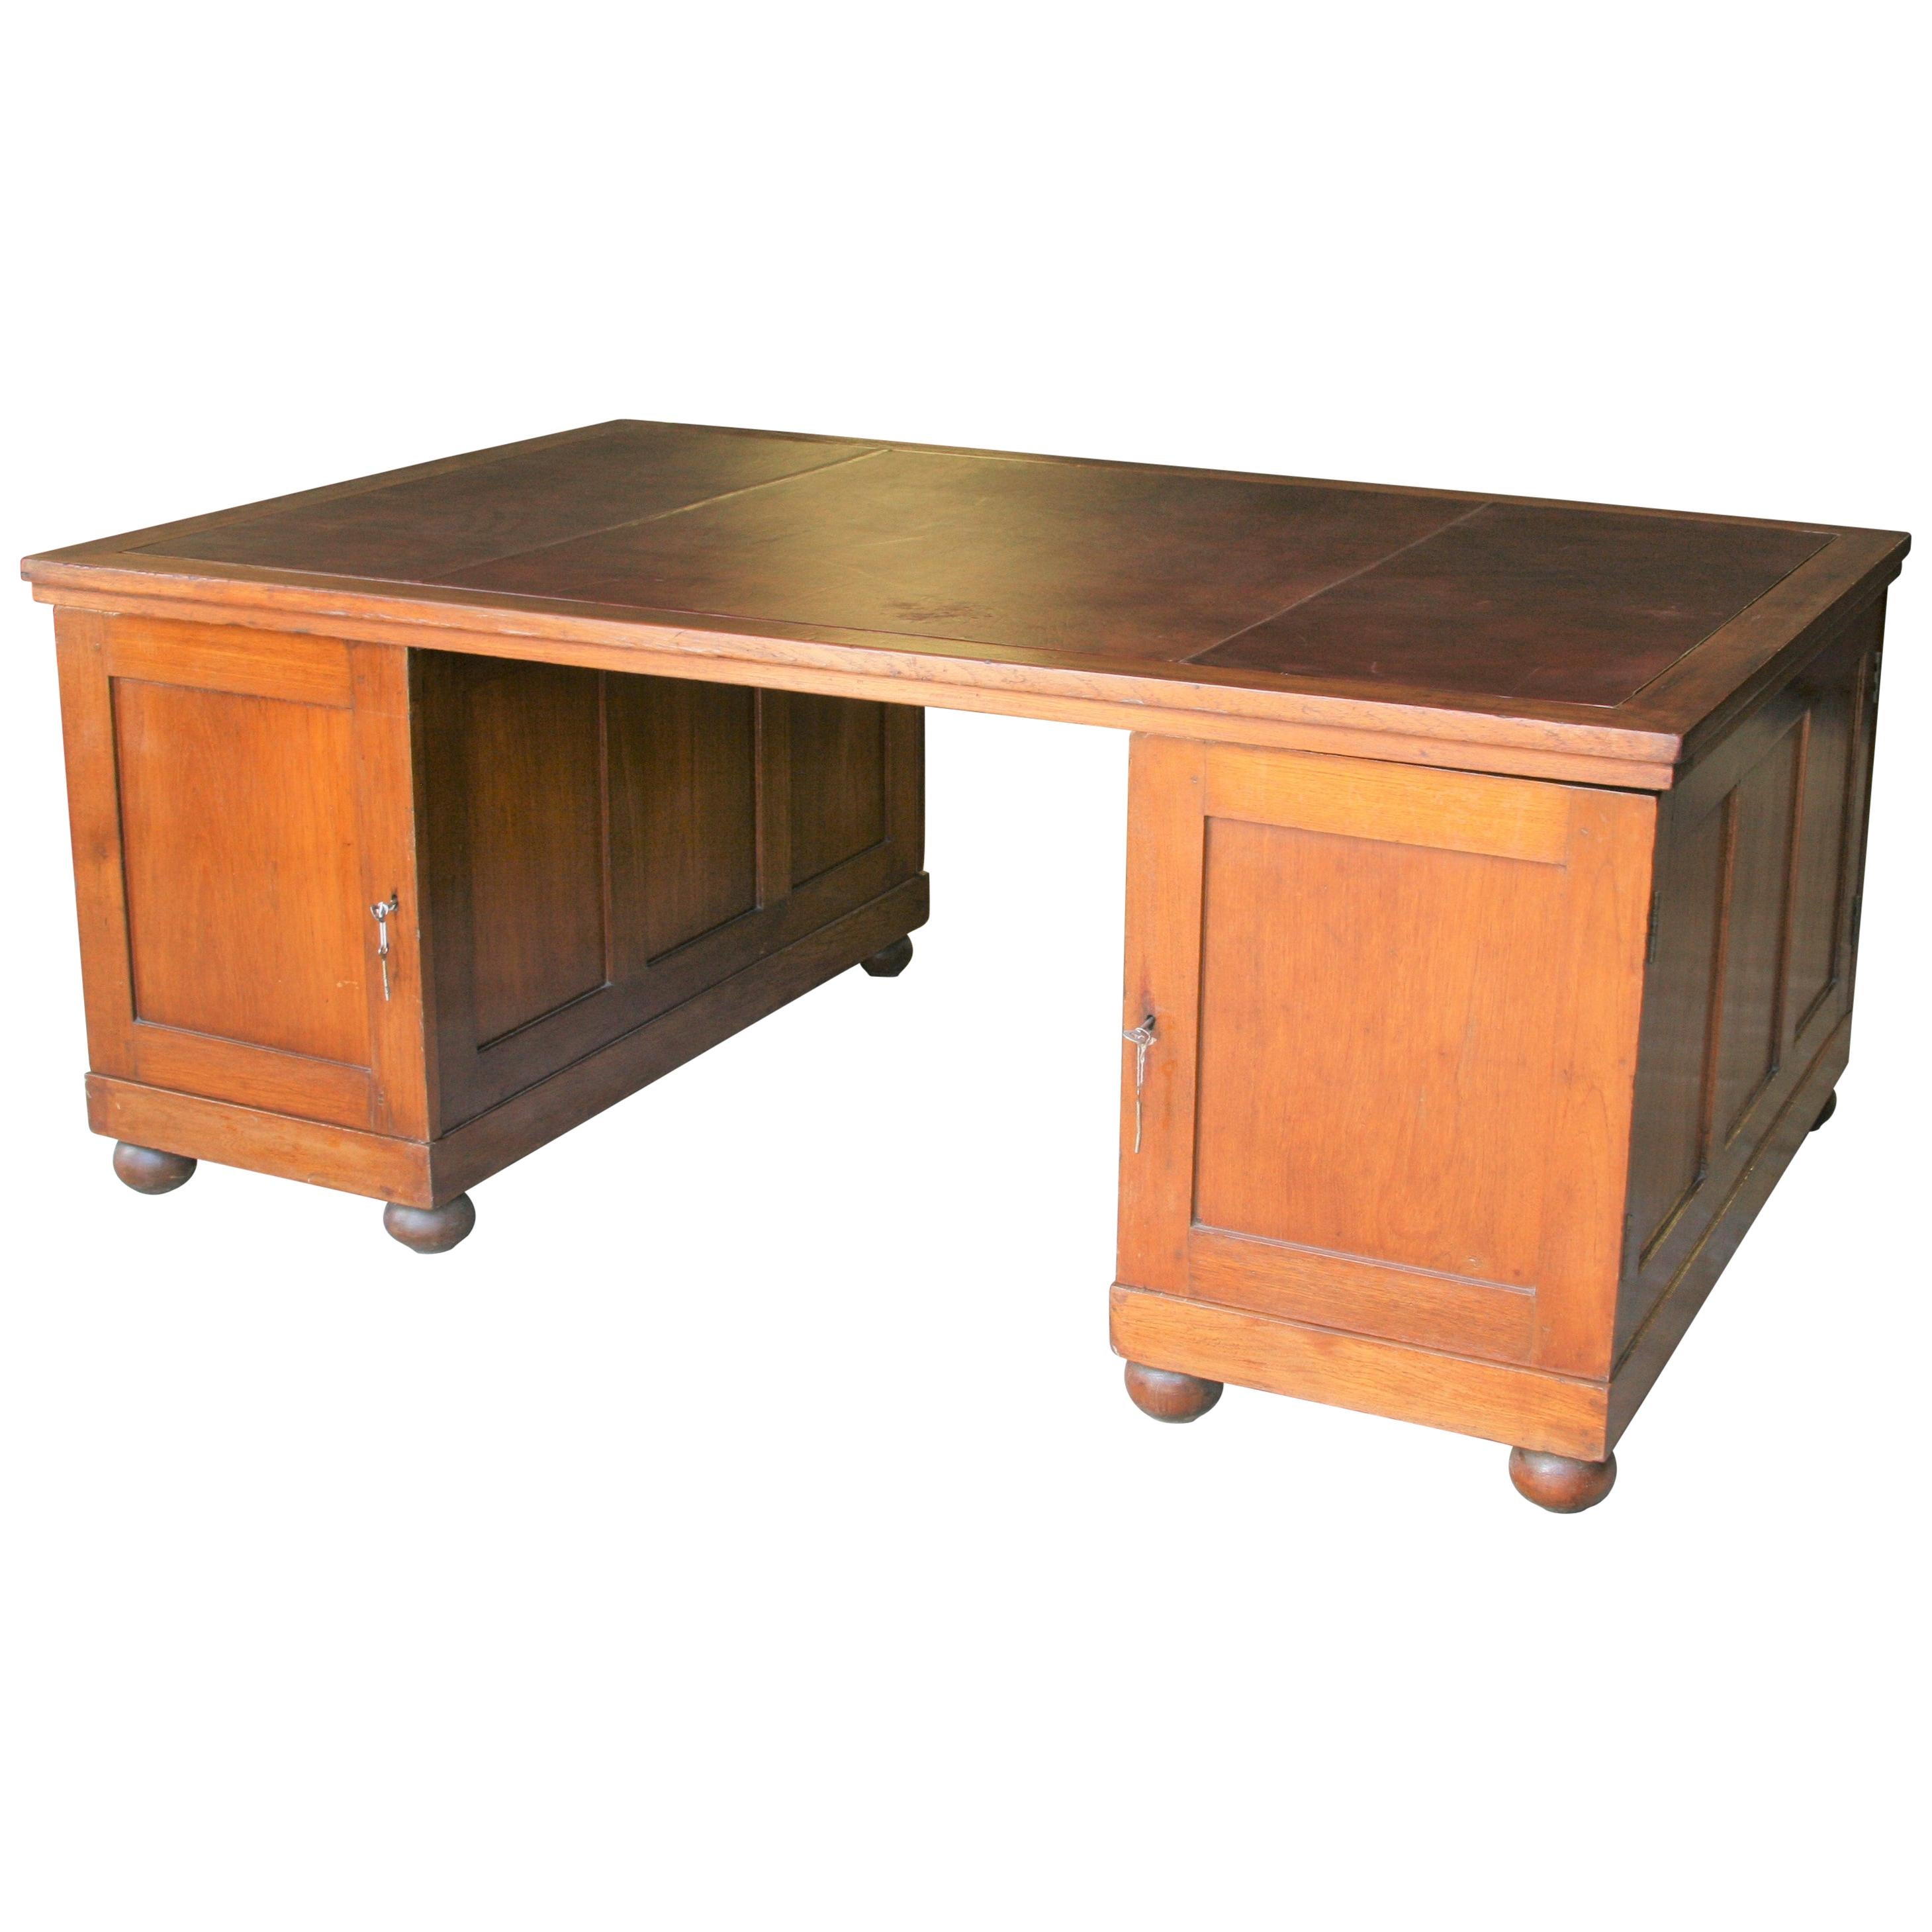 1910s Lavish Victorian Style Large Mahogany Partner's Desk from a Bank For Sale